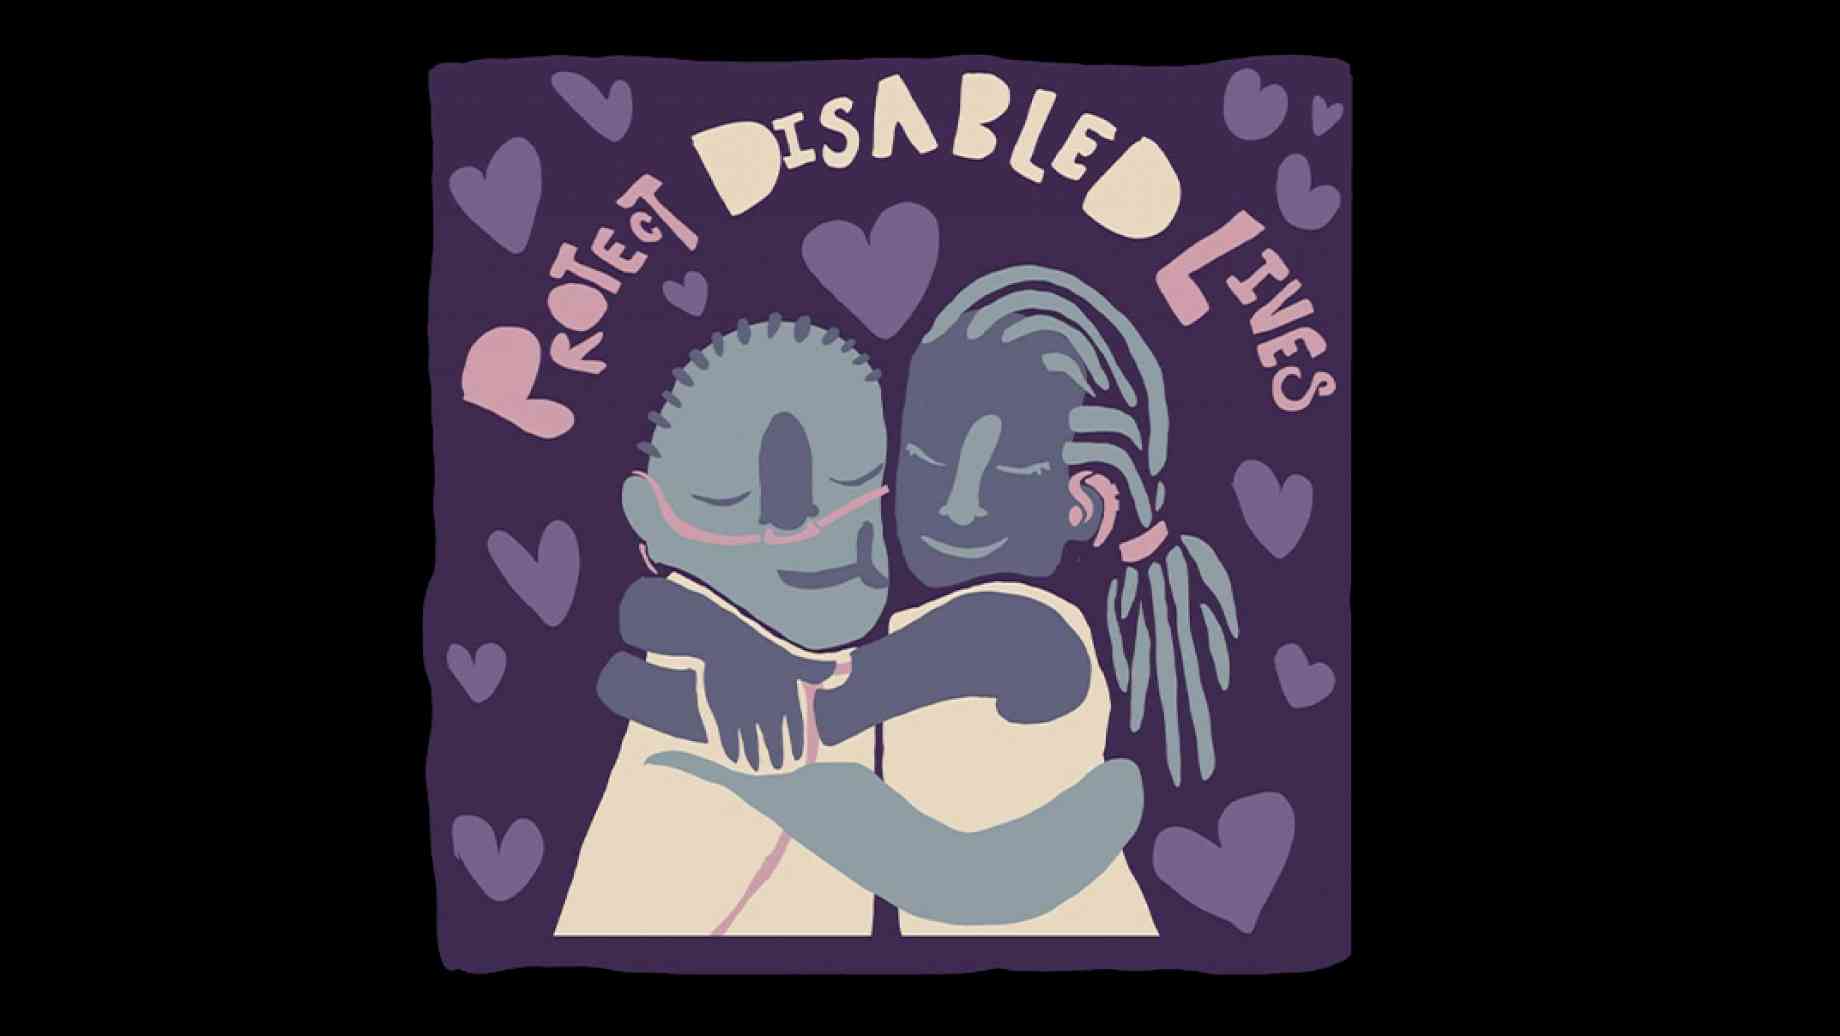 A digital painting in dark and light purple of two people embracing. One of them is wearing nasal tubes, as if for an oxygen tank. Above them are the words "Protect Disabled Lives," in light purple, surrounded by hearts.